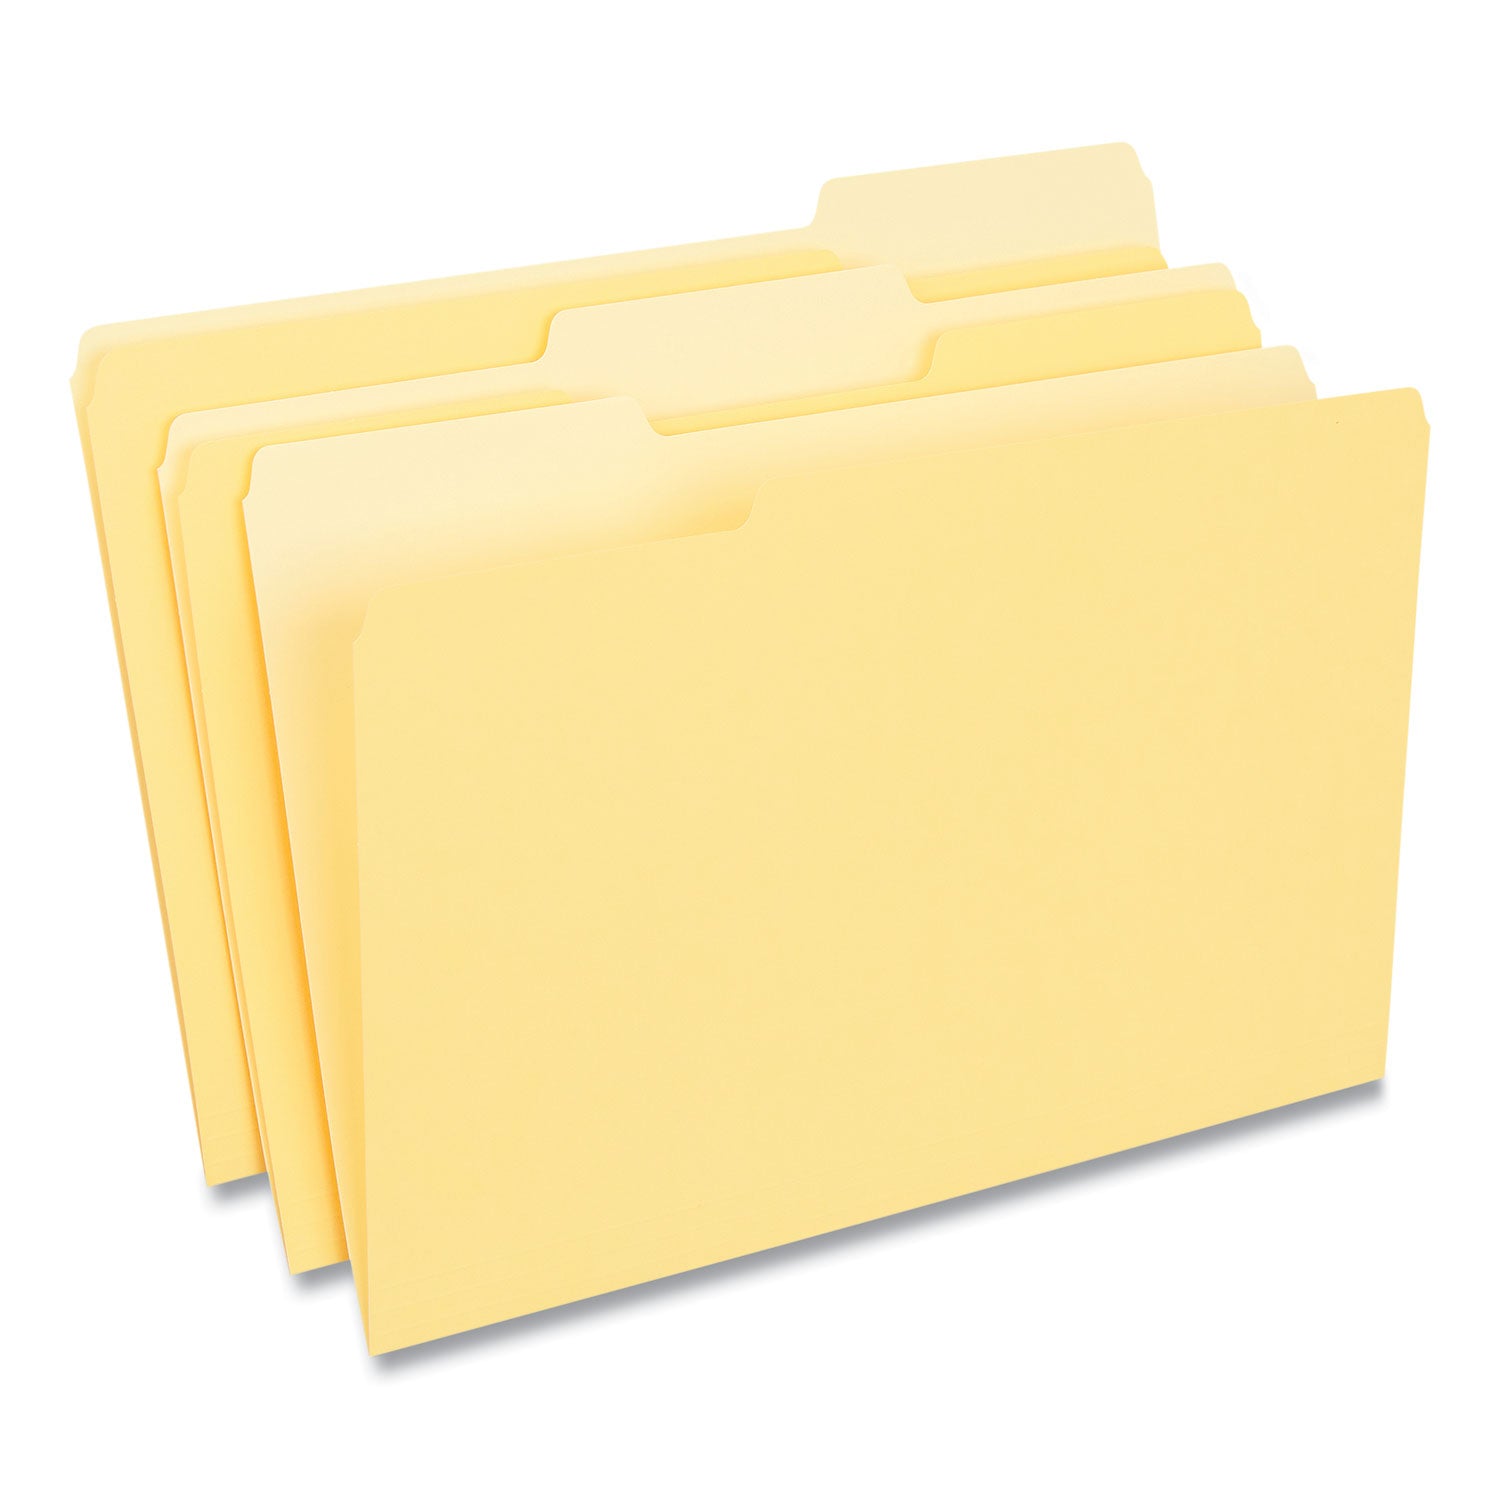 Deluxe Colored Top Tab File Folders, 1/3-Cut Tabs: Assorted, Legal Size, Yellow/Light Yellow, 100/Box - 